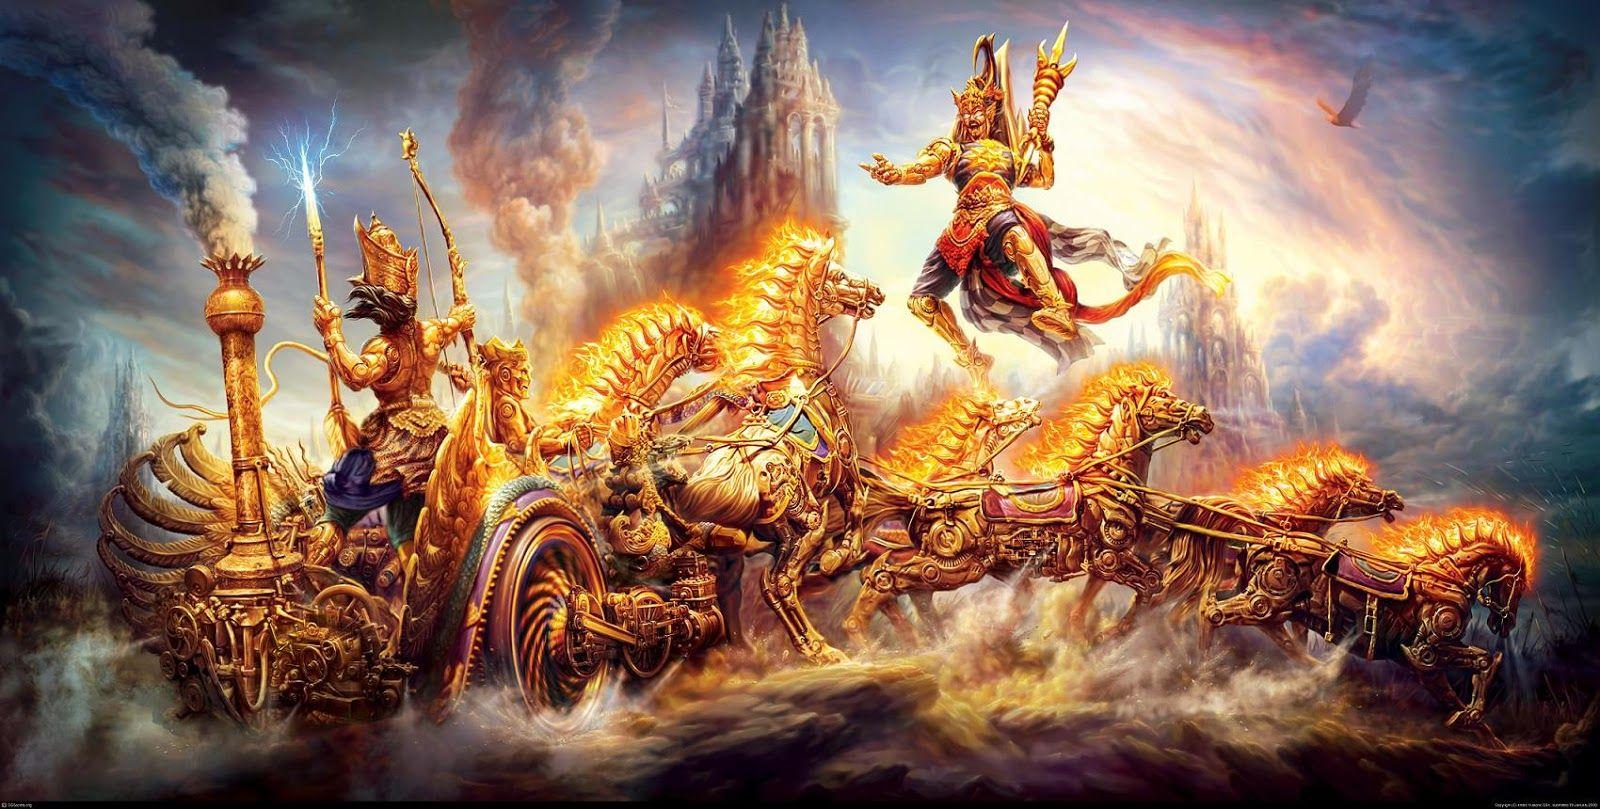 Bhagavad Gita ON HI QUALITY LARGE PRINT 36X24 INCHES Photographic Paper -  Art & Paintings posters in India - Buy art, film, design, movie, music,  nature and educational paintings/wallpapers at Flipkart.com